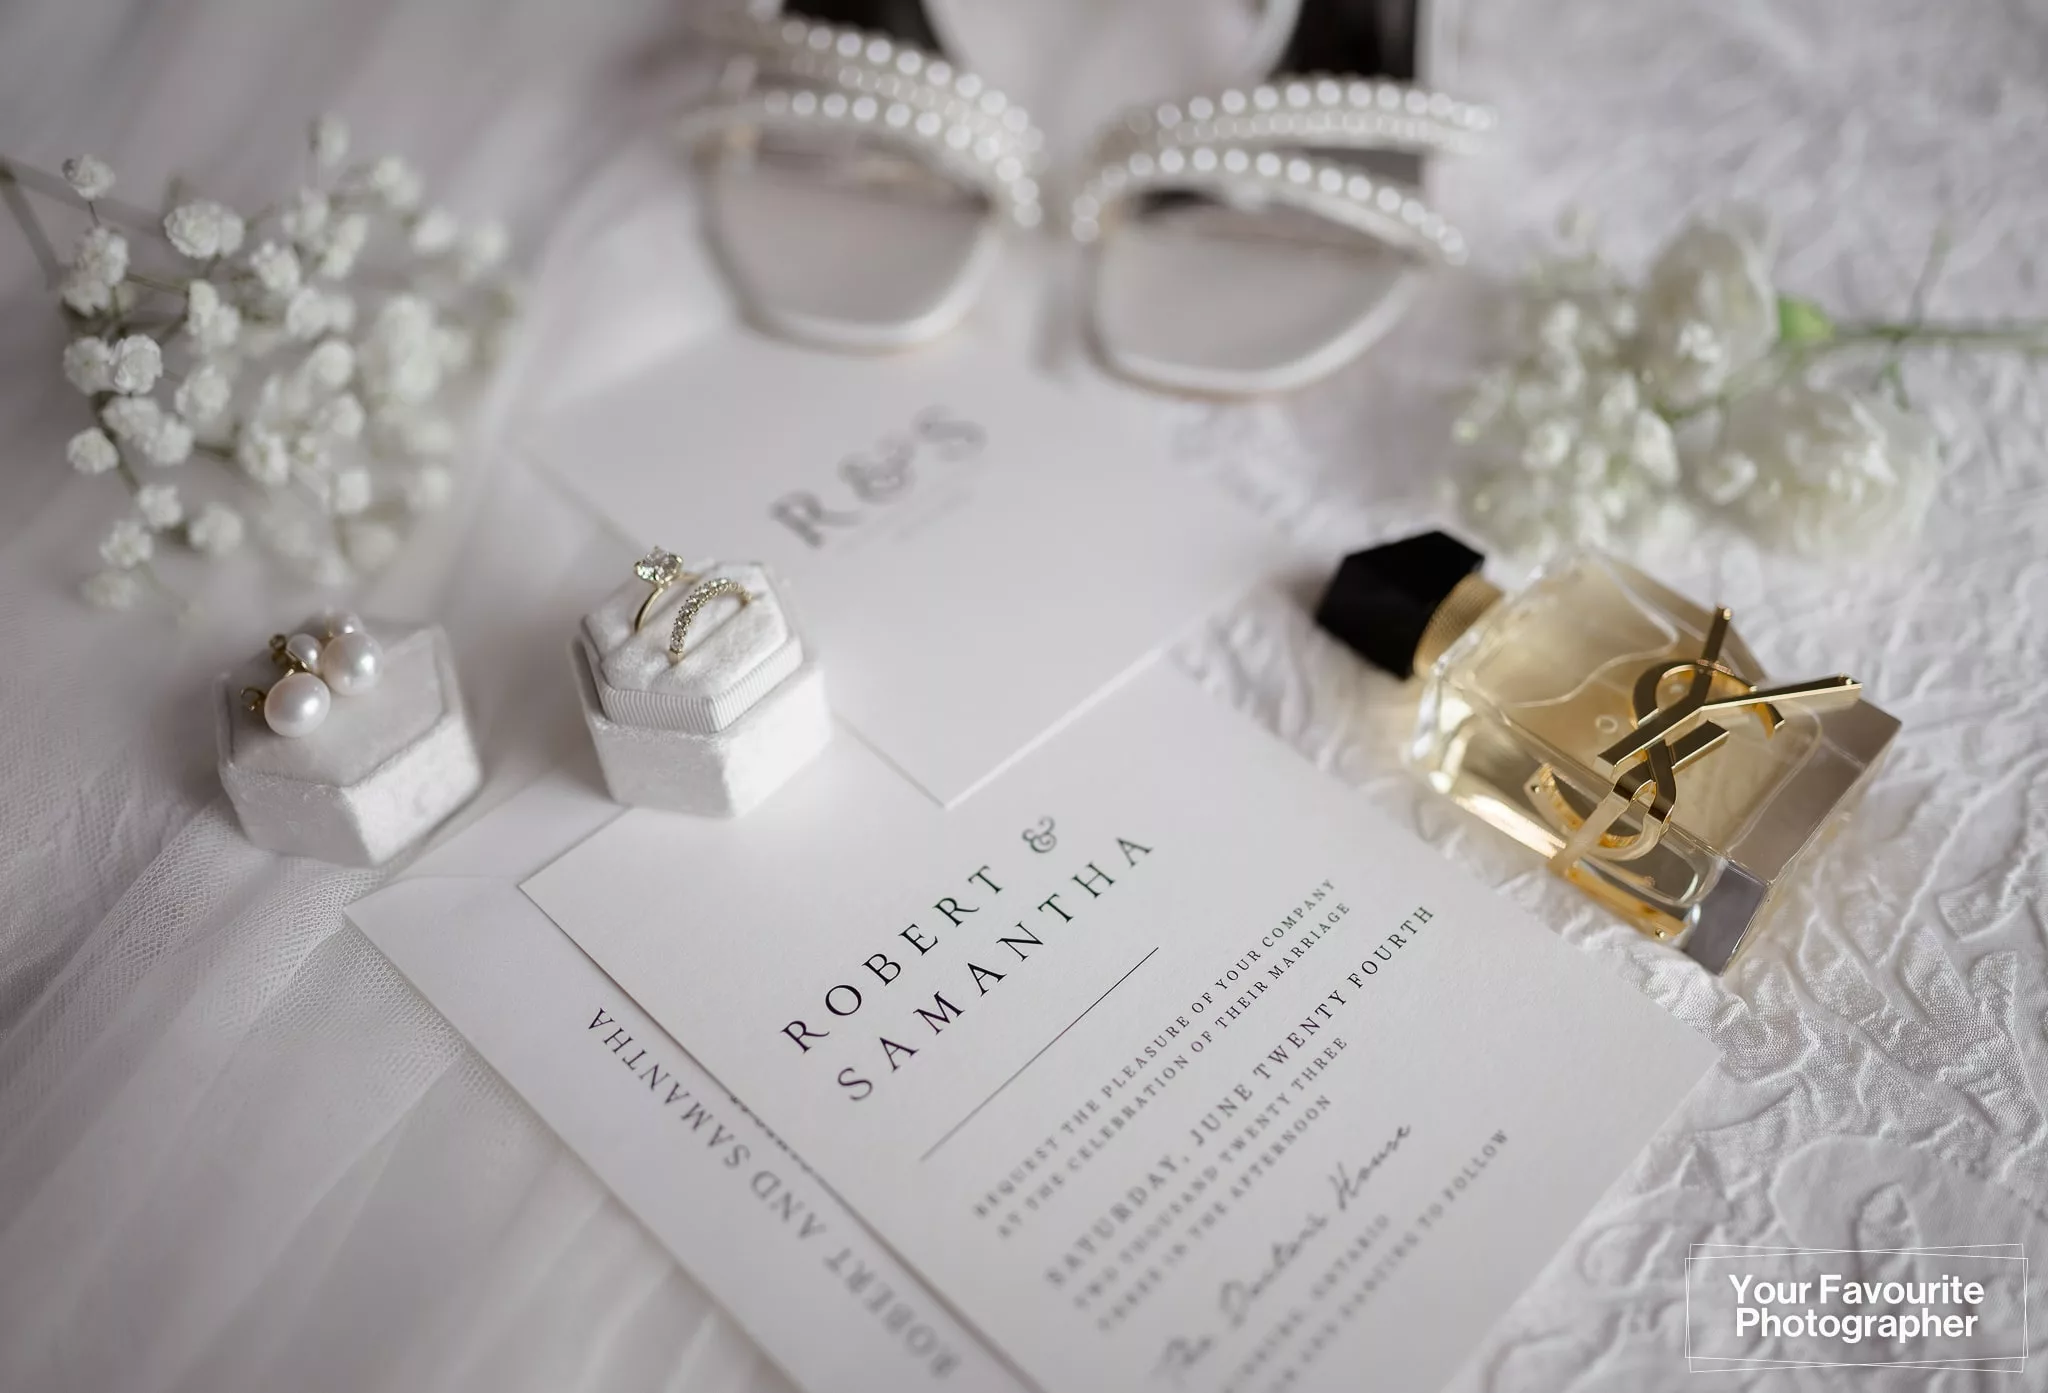 Flat lay of a bride's wedding accessories including YSL perfume, white flowers, a wedding invitation, wedding rings, and shoes